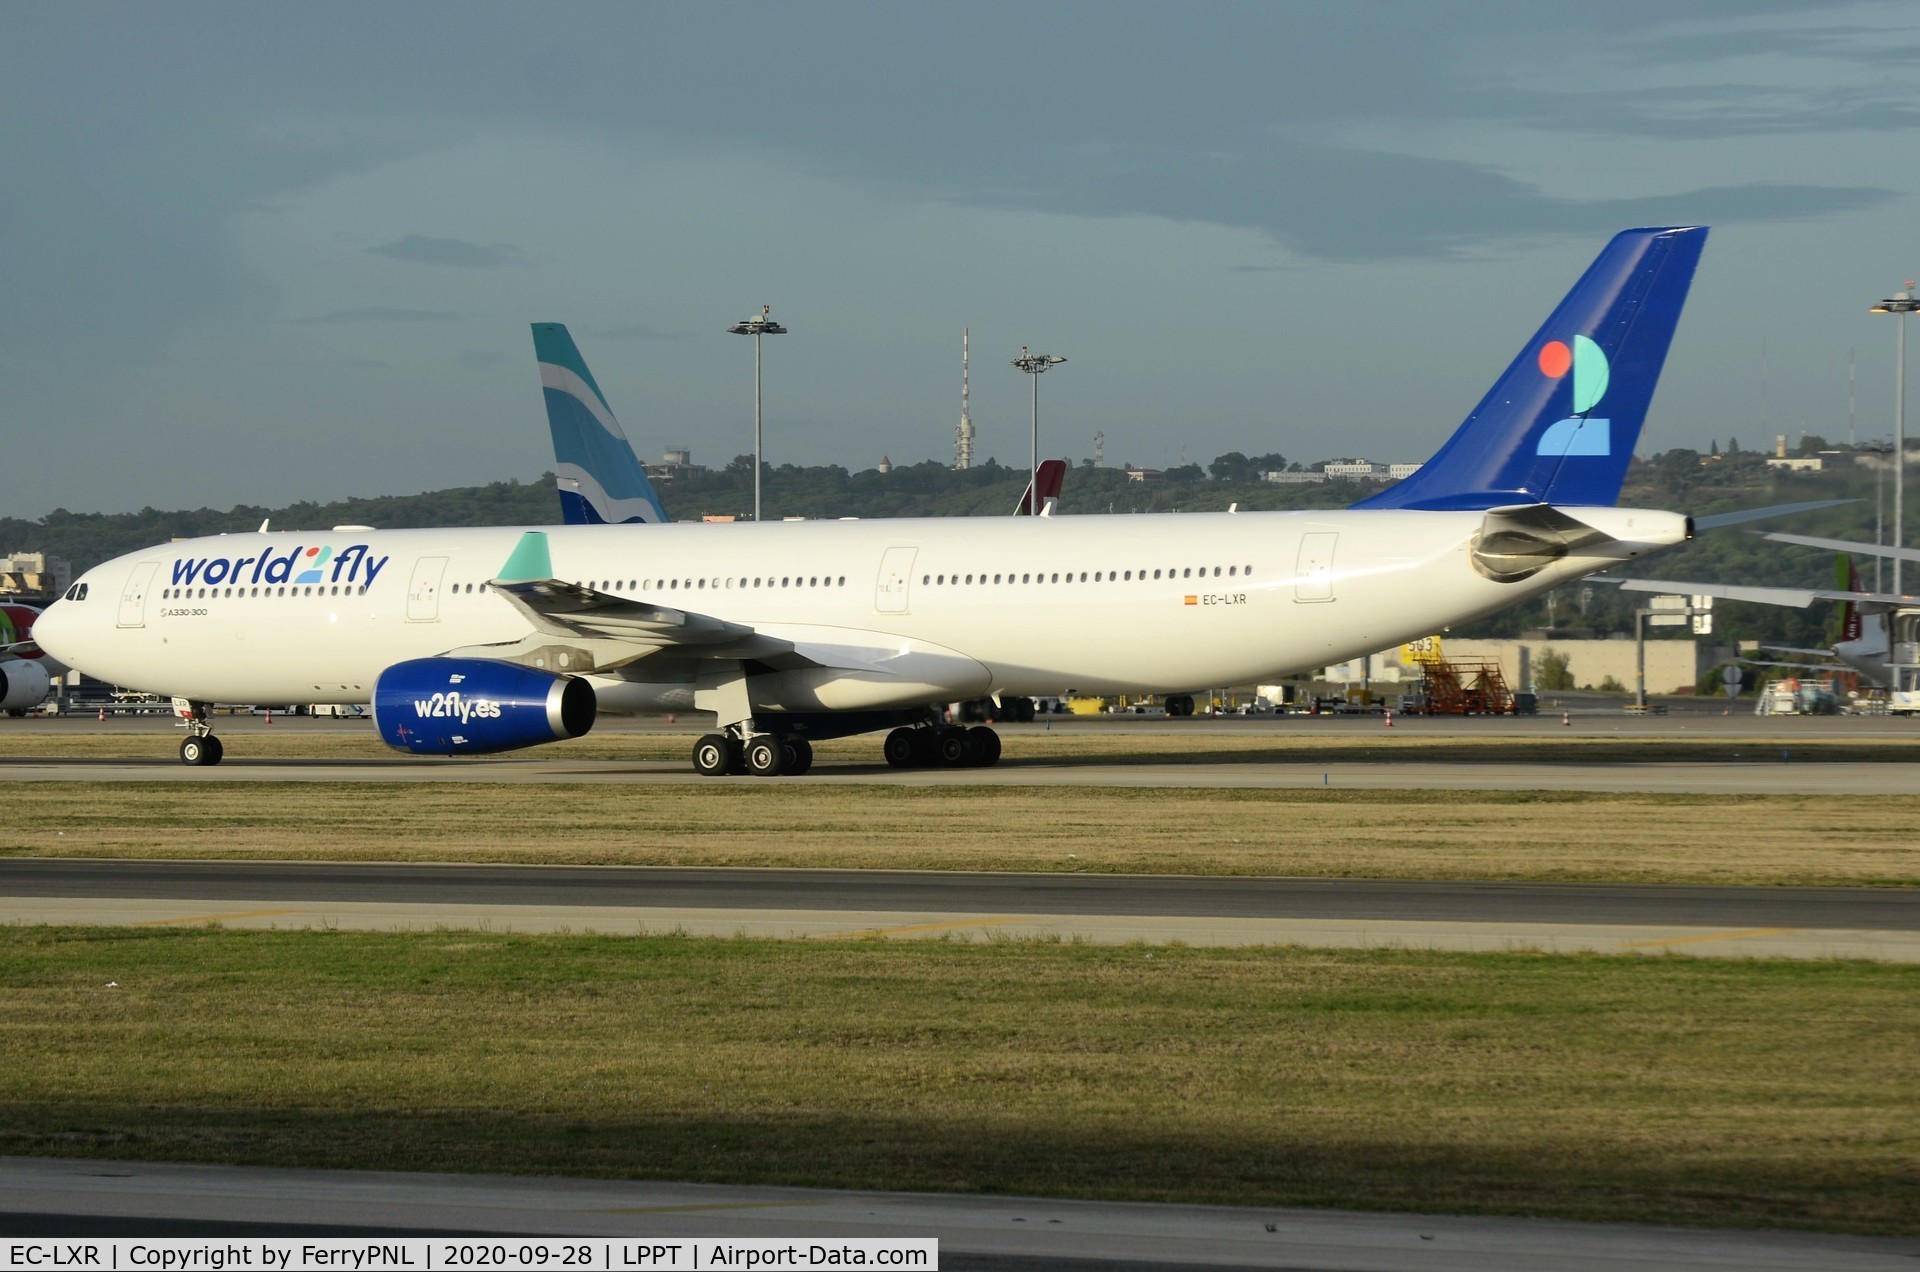 EC-LXR, 2010 Airbus A330-343X C/N 1097, World2Fly A333 taxiing-in after arrival from PUJ